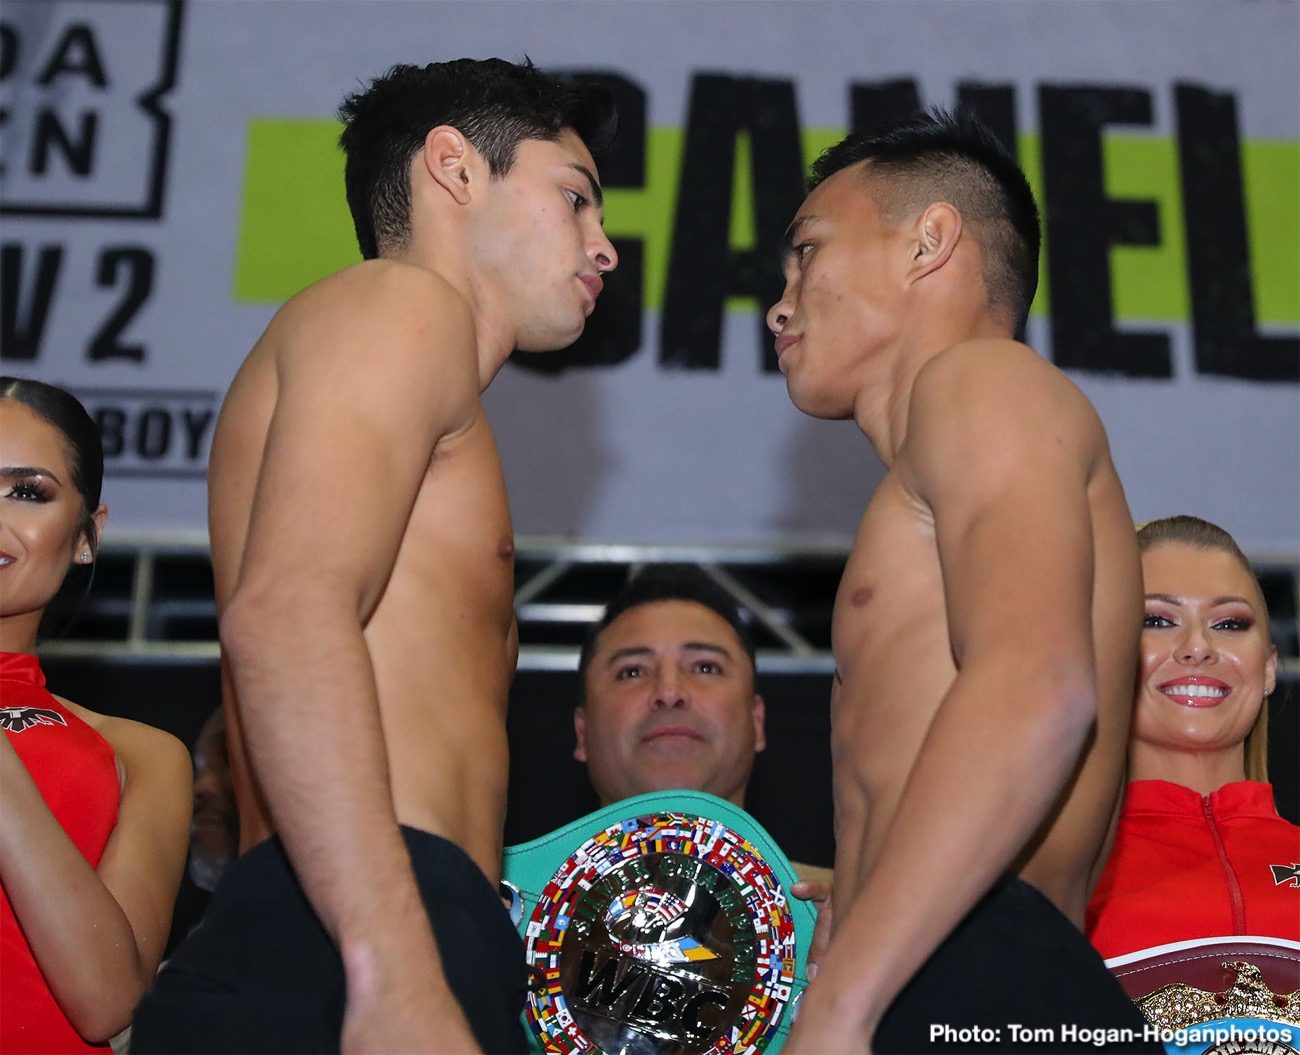 Image: Ryan Garcia: "HATERS want to see me lose" to Romero Duno